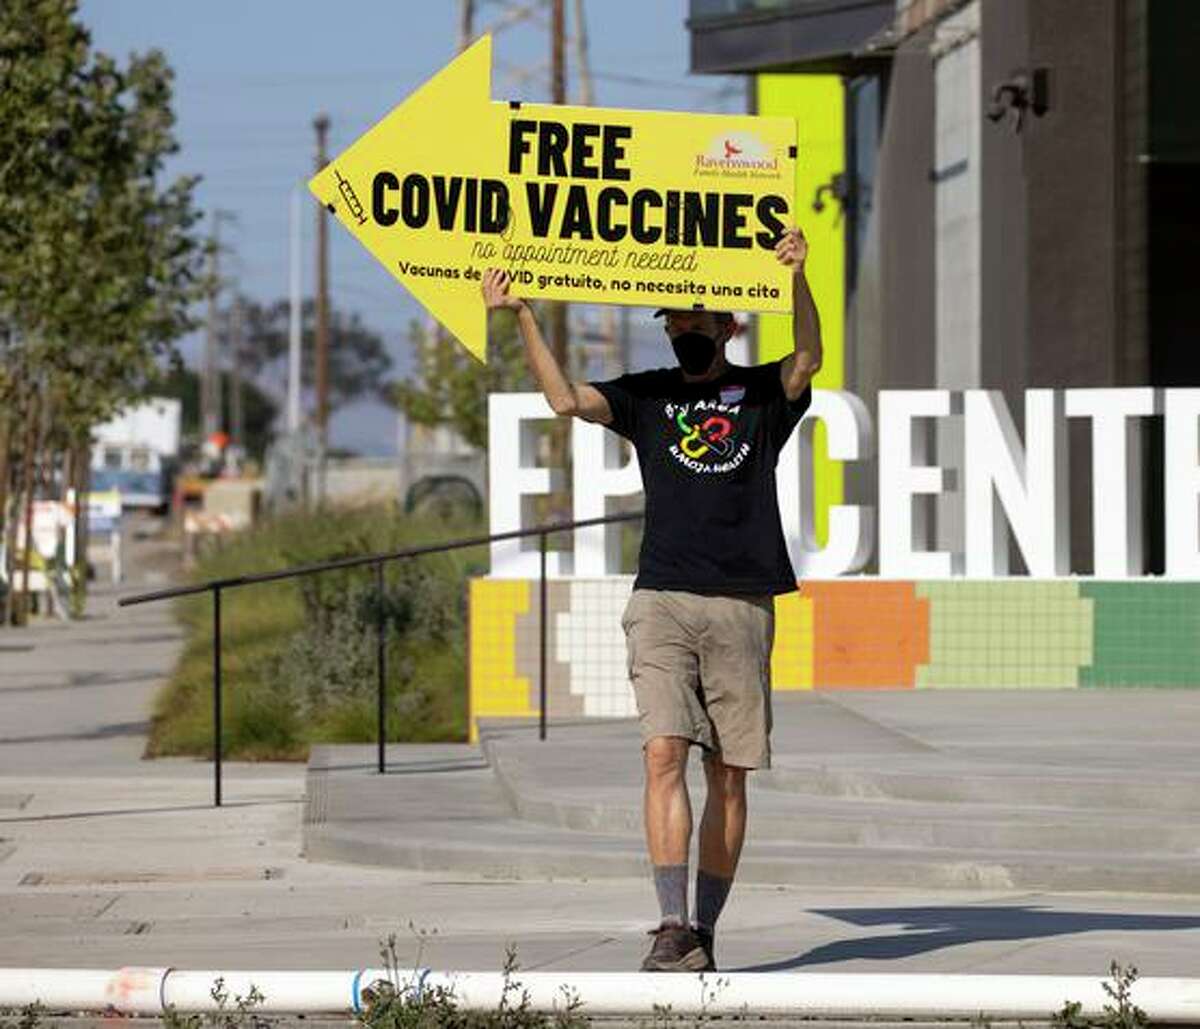 Coronavirus vaccinations being promoted in East Palo Alto last week.